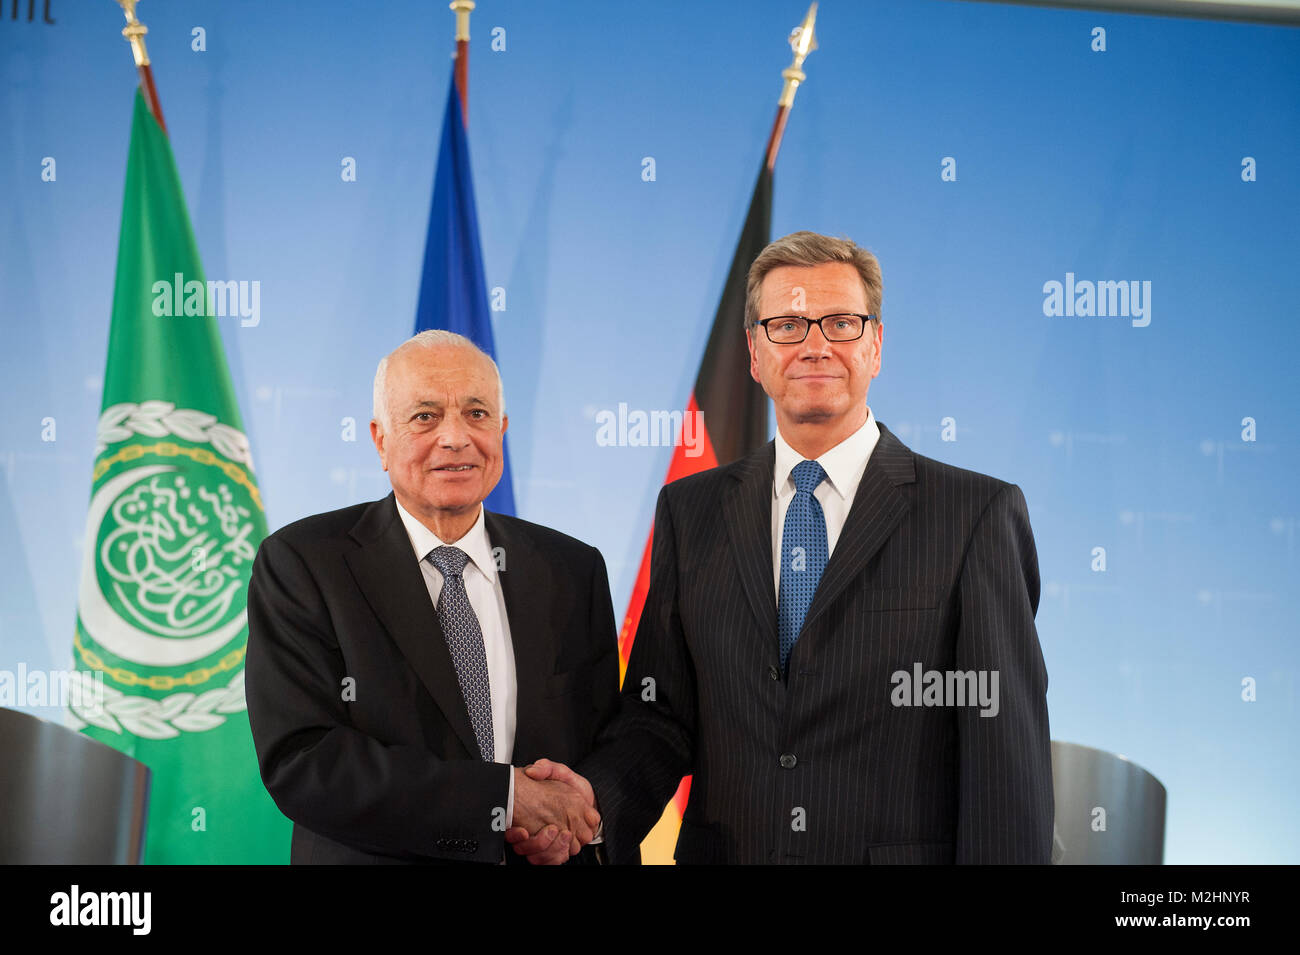 Press conference between Foreign Minister Westerwelle and Secretary General of the Arab League, Nabil Elaraby. They are together against terrorism. Stock Photo